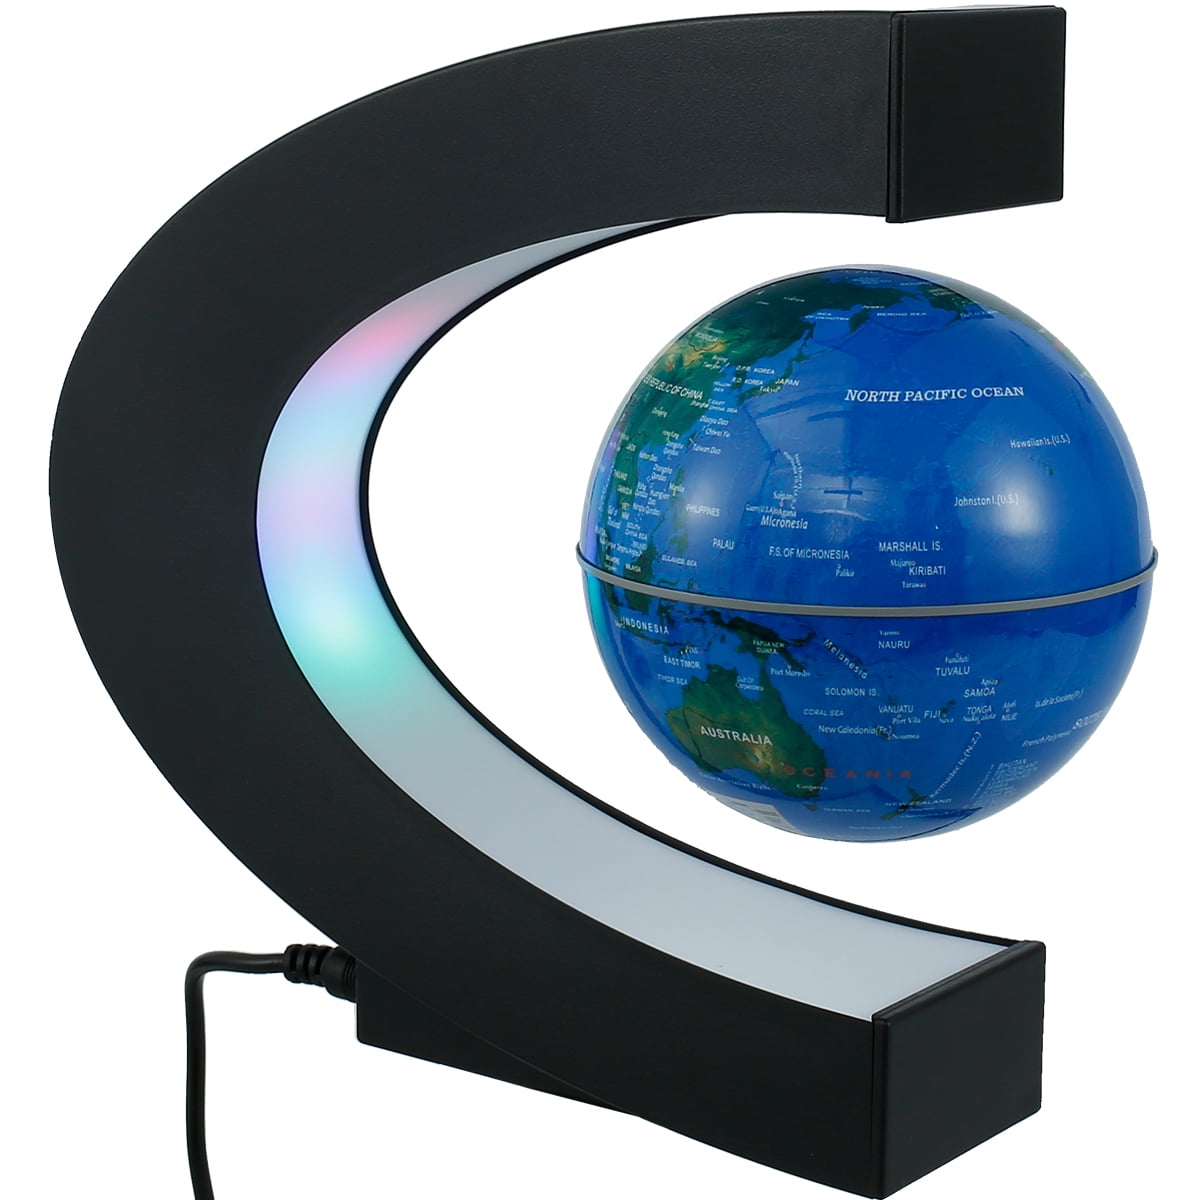 Details about   Table Top World Globe Black Decorative Desk Decor Tabletop Display Small 5 Inch 